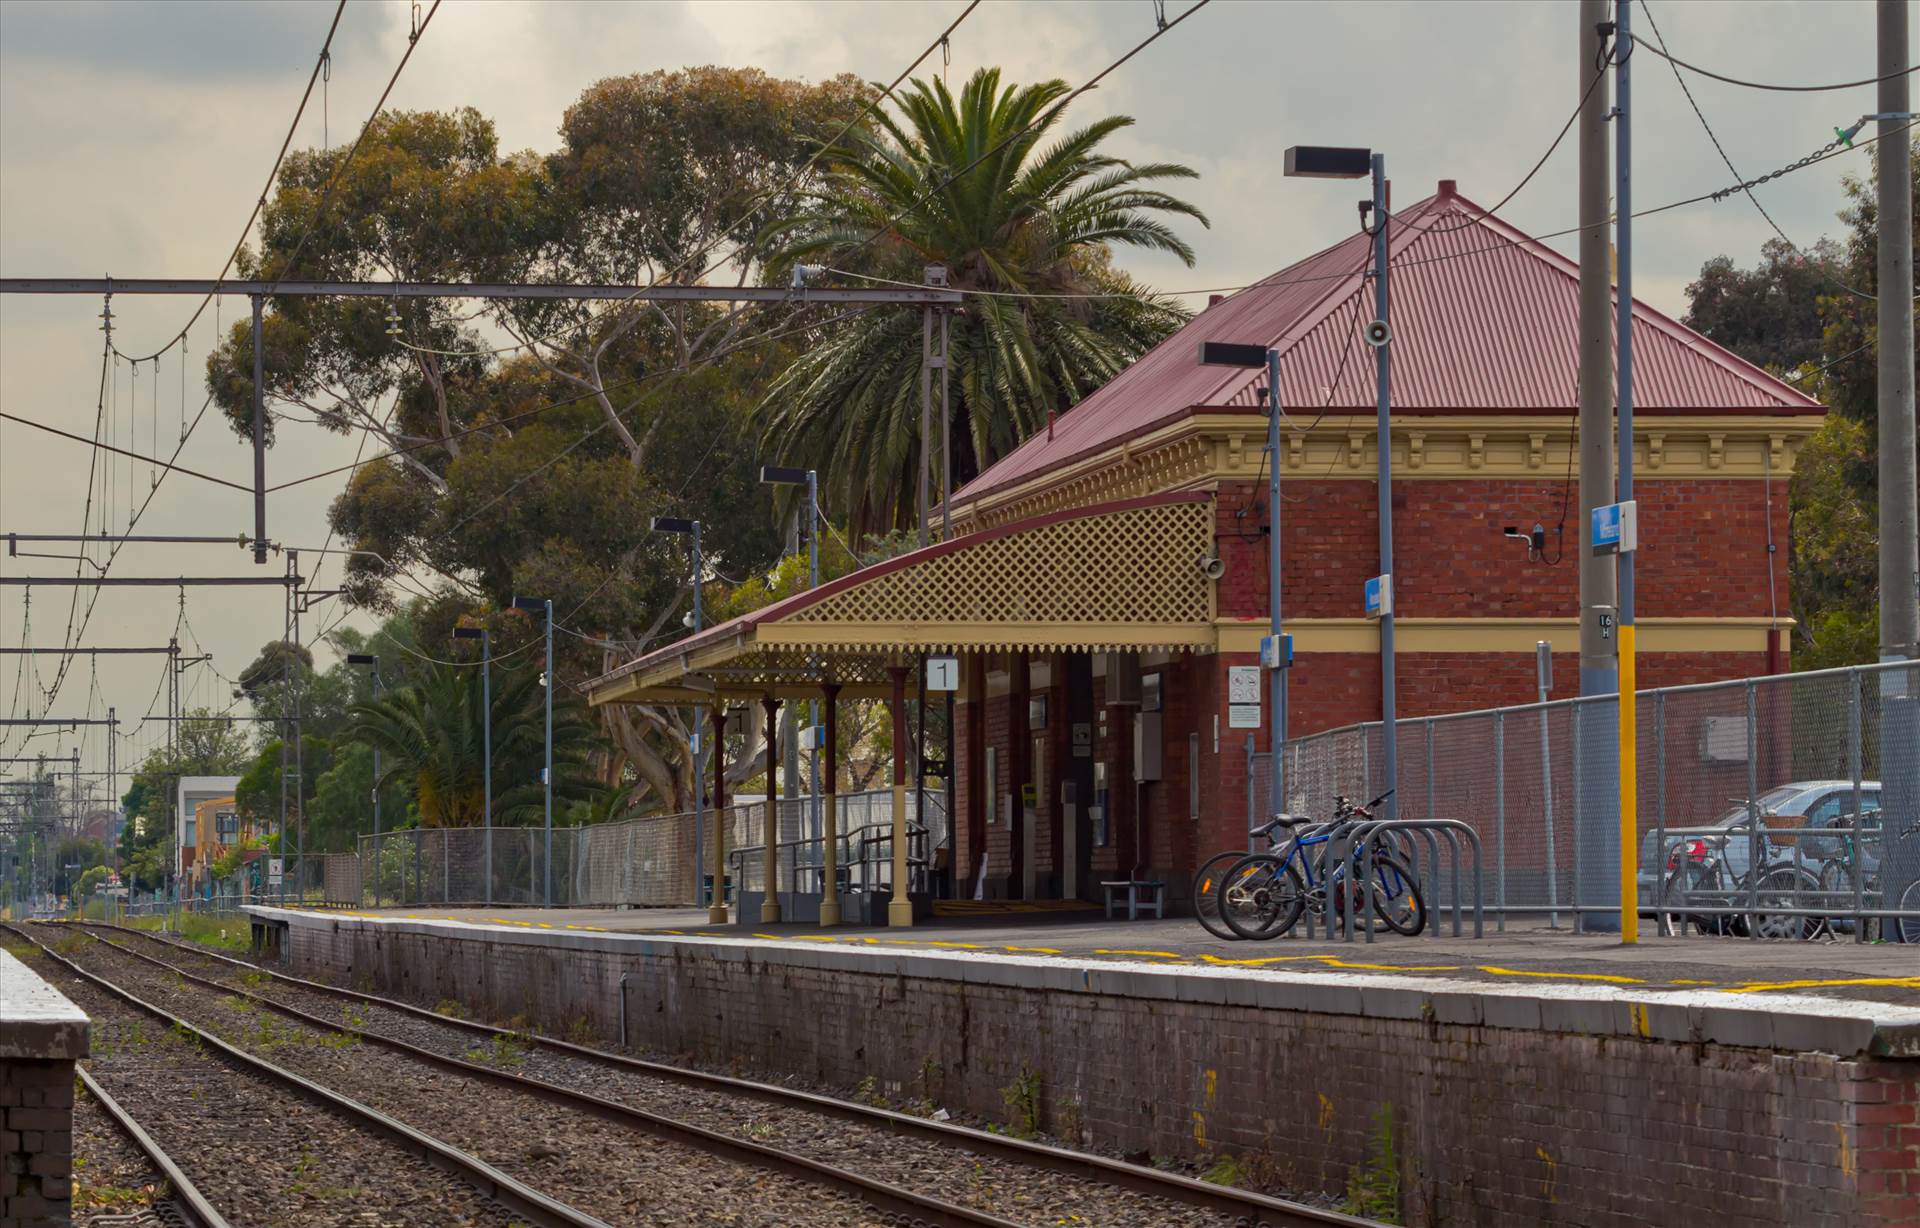 Moreland railway station Moreland railway station by johntorcasio